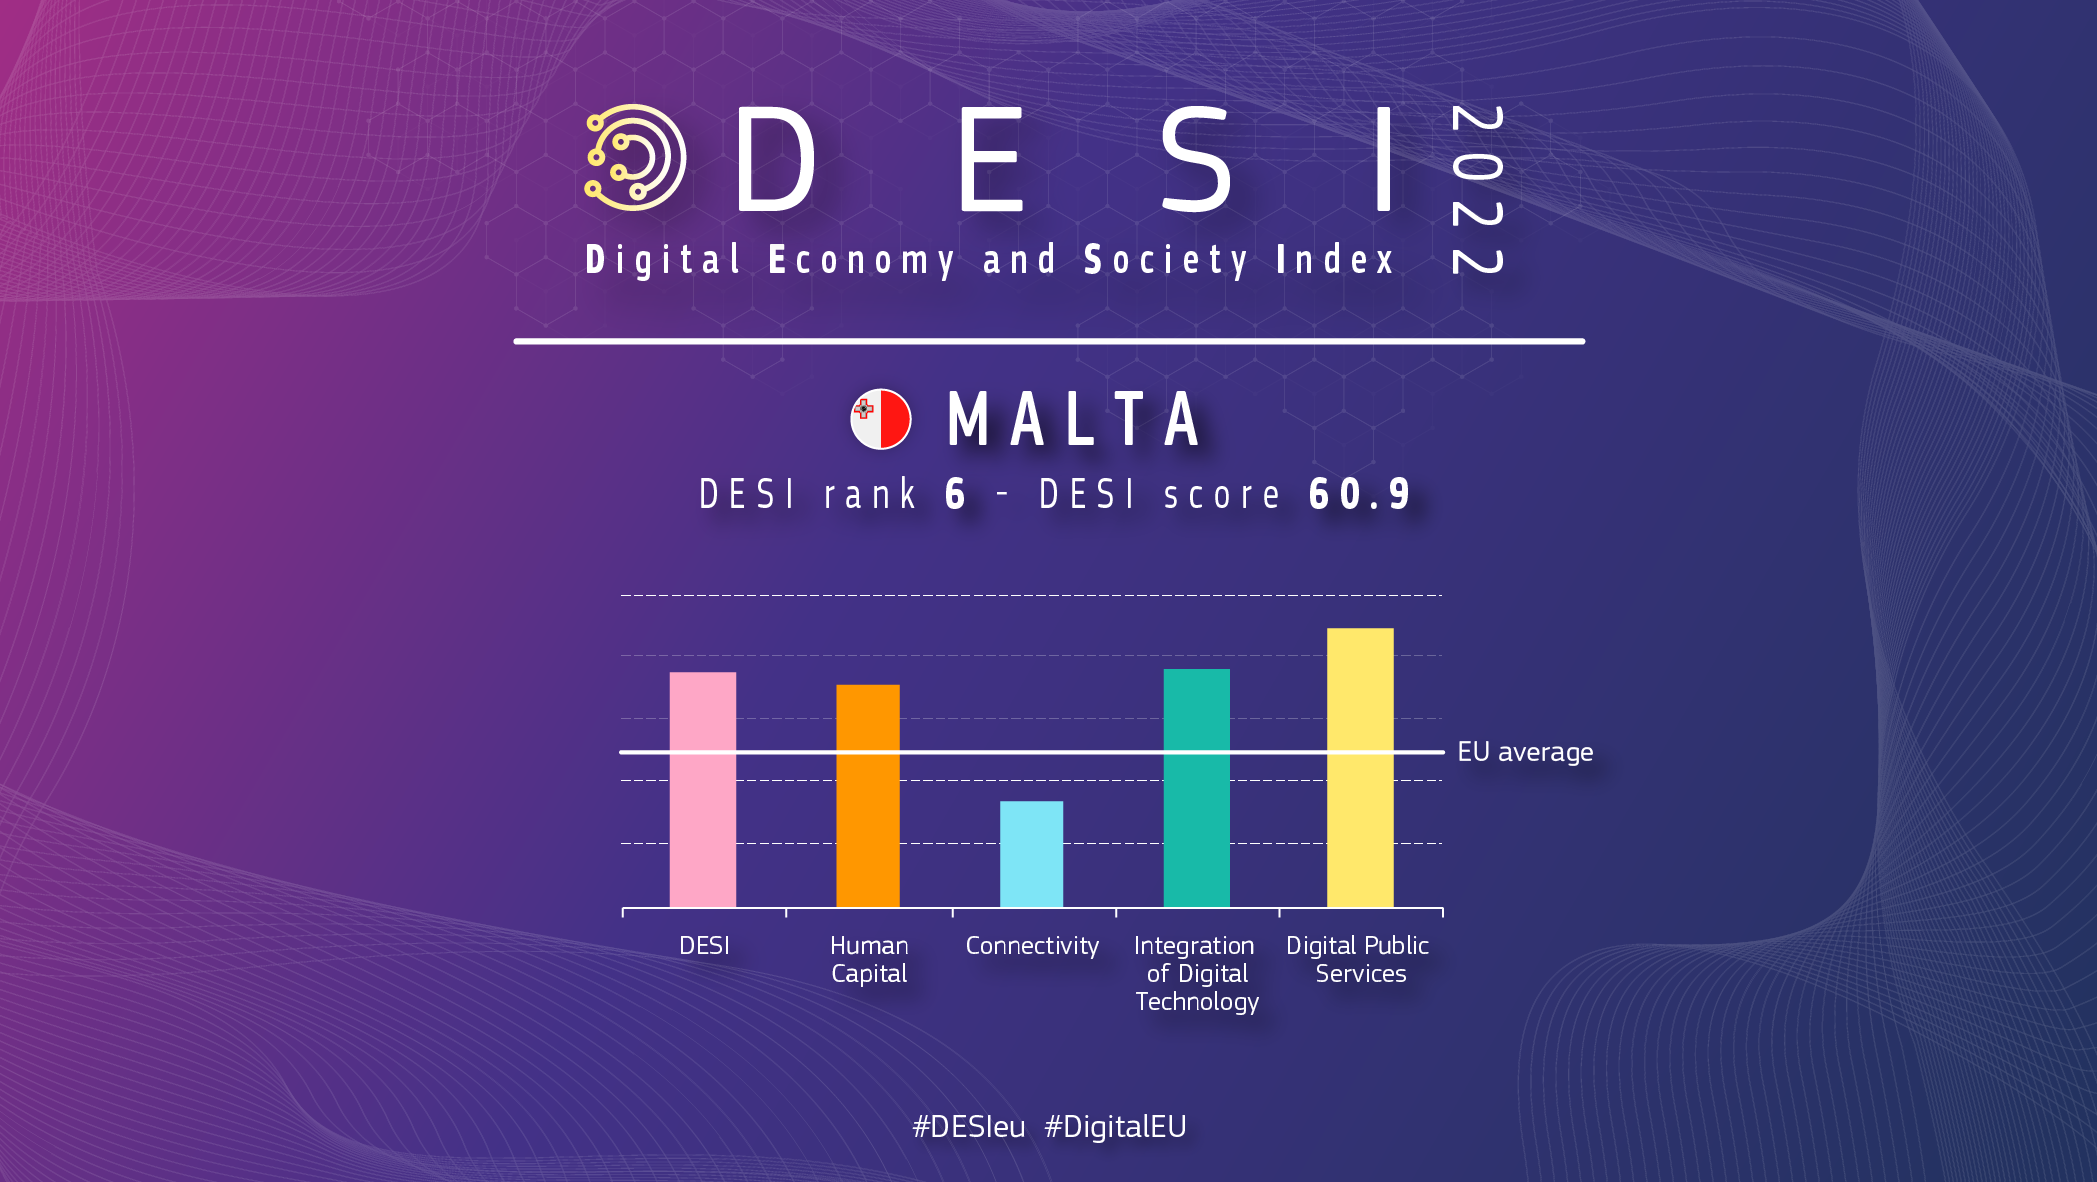 Graphic overview of Malta in DESI showing a ranking of 6 with a score of 60.9